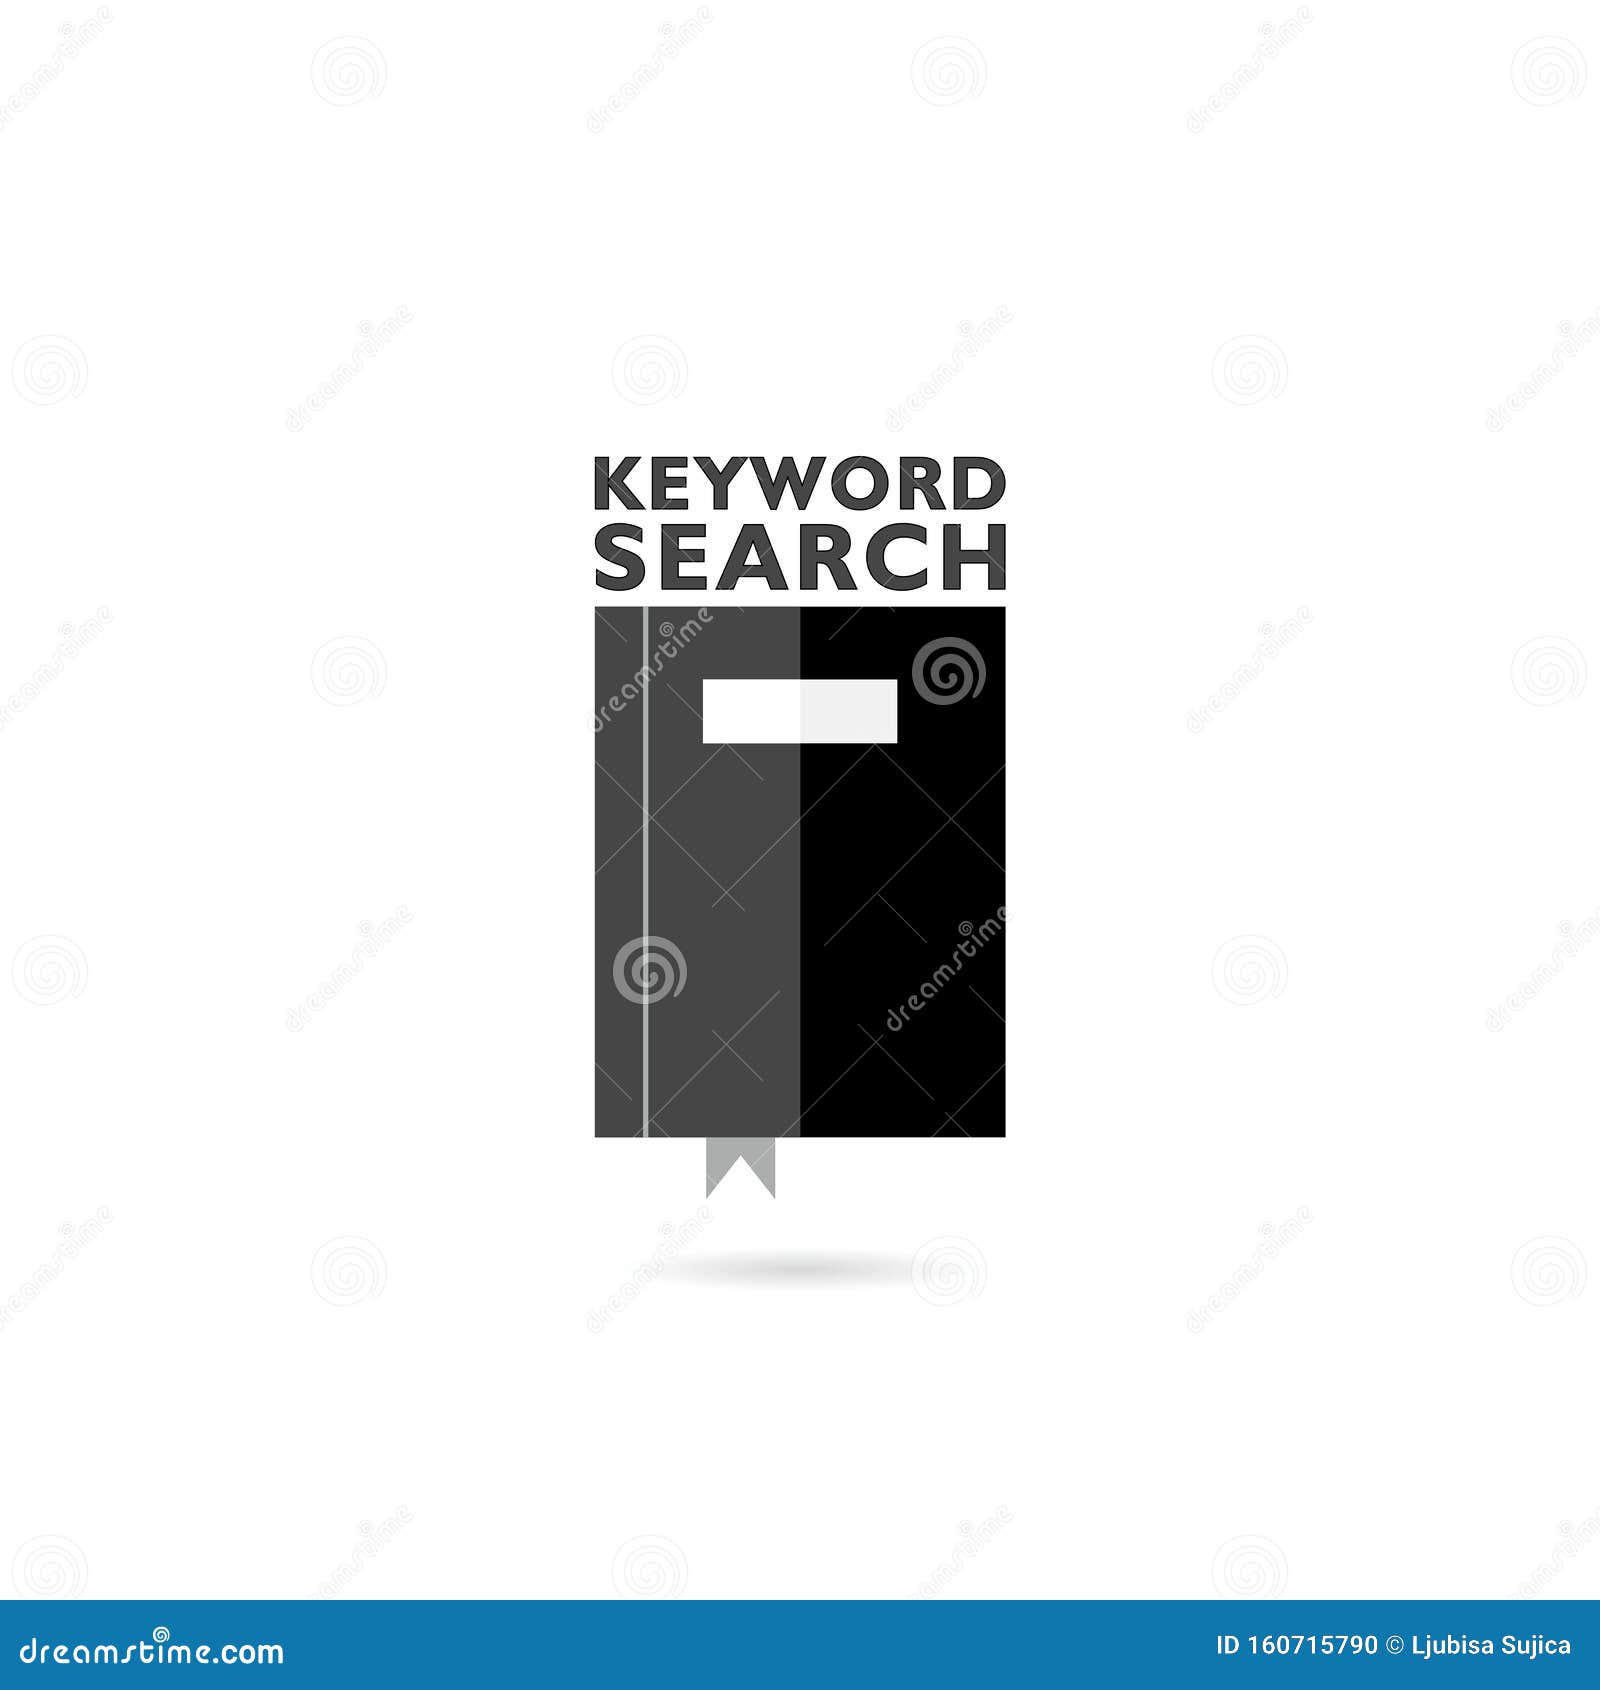 Keyword Search Icon Isolated On White Background Stock Vector Illustration Of Filled Landing